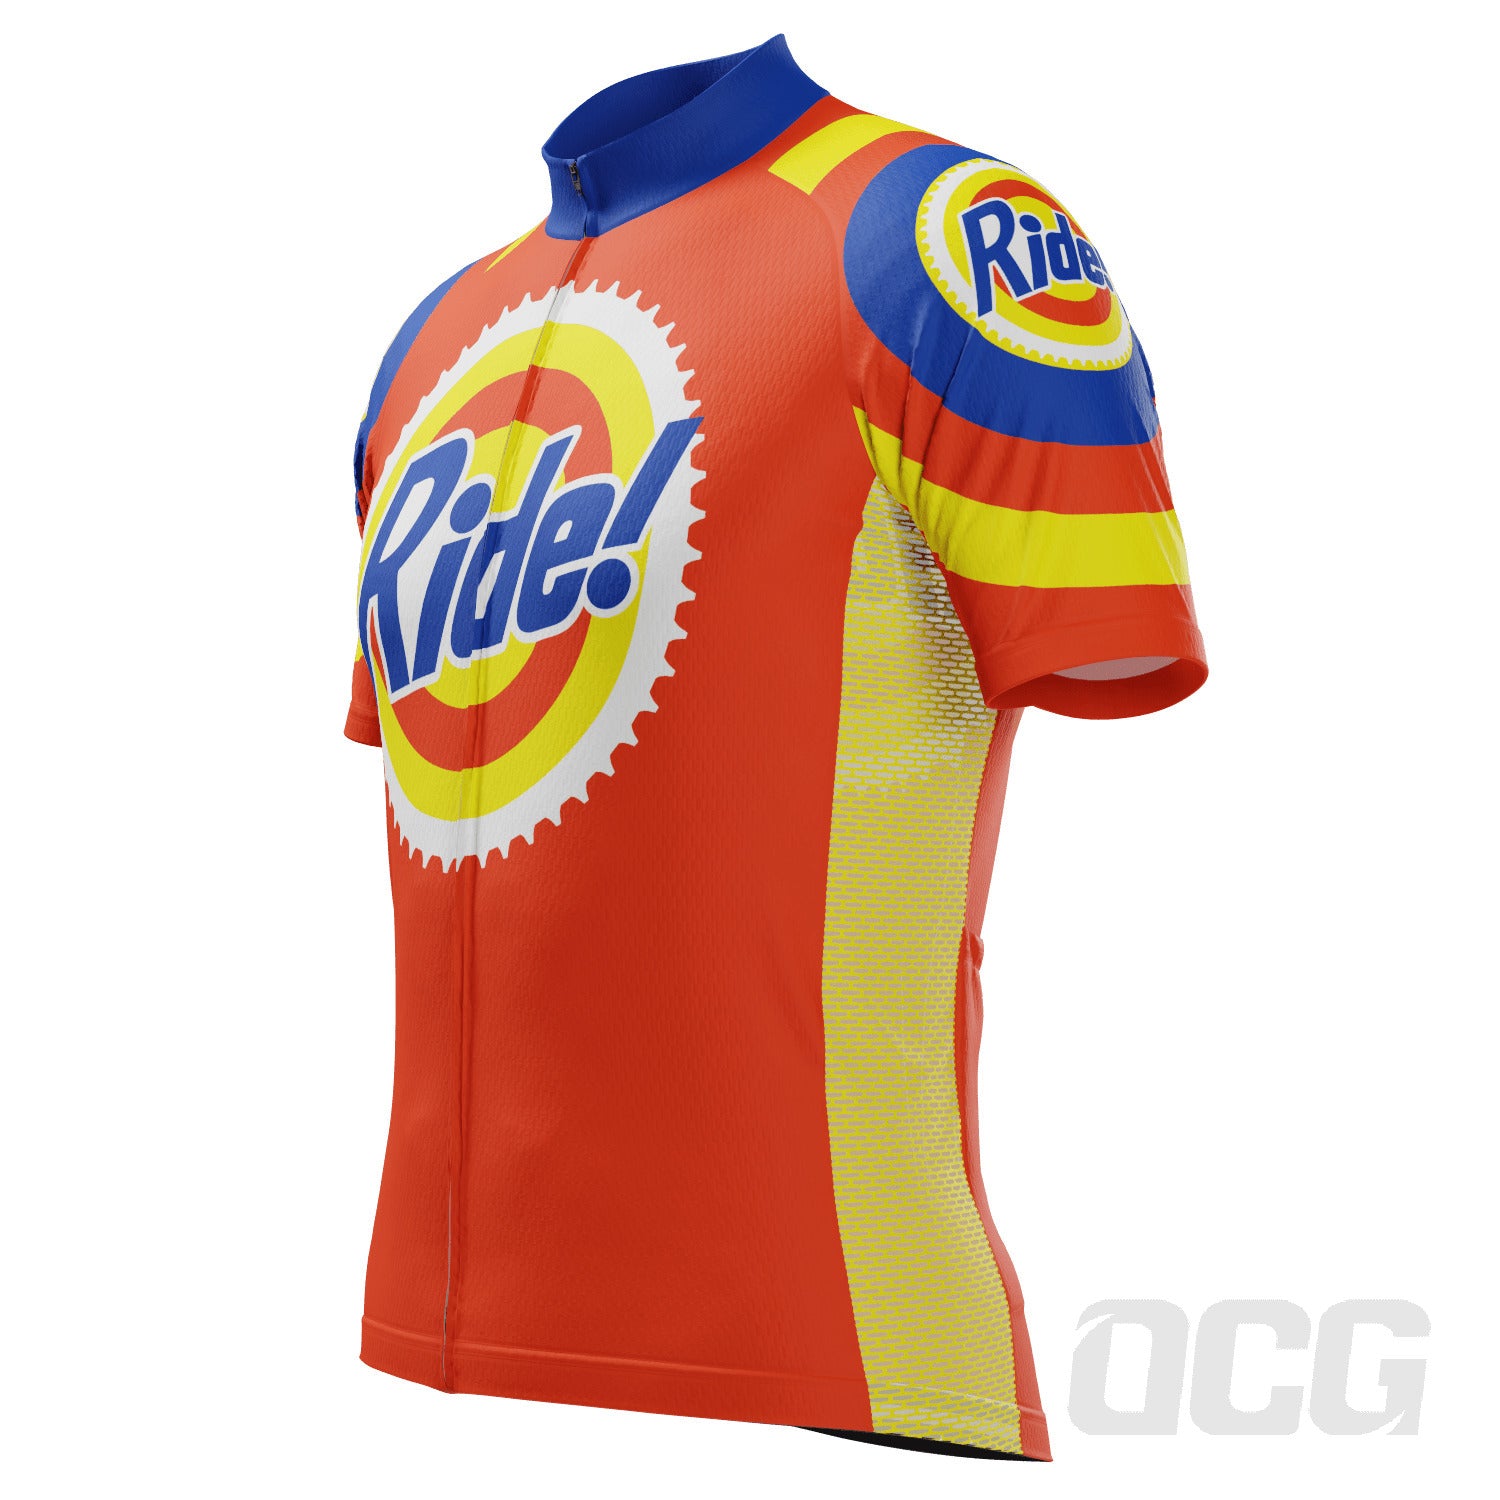 Men's Ride the Tide Short Sleeve Cycling Jersey